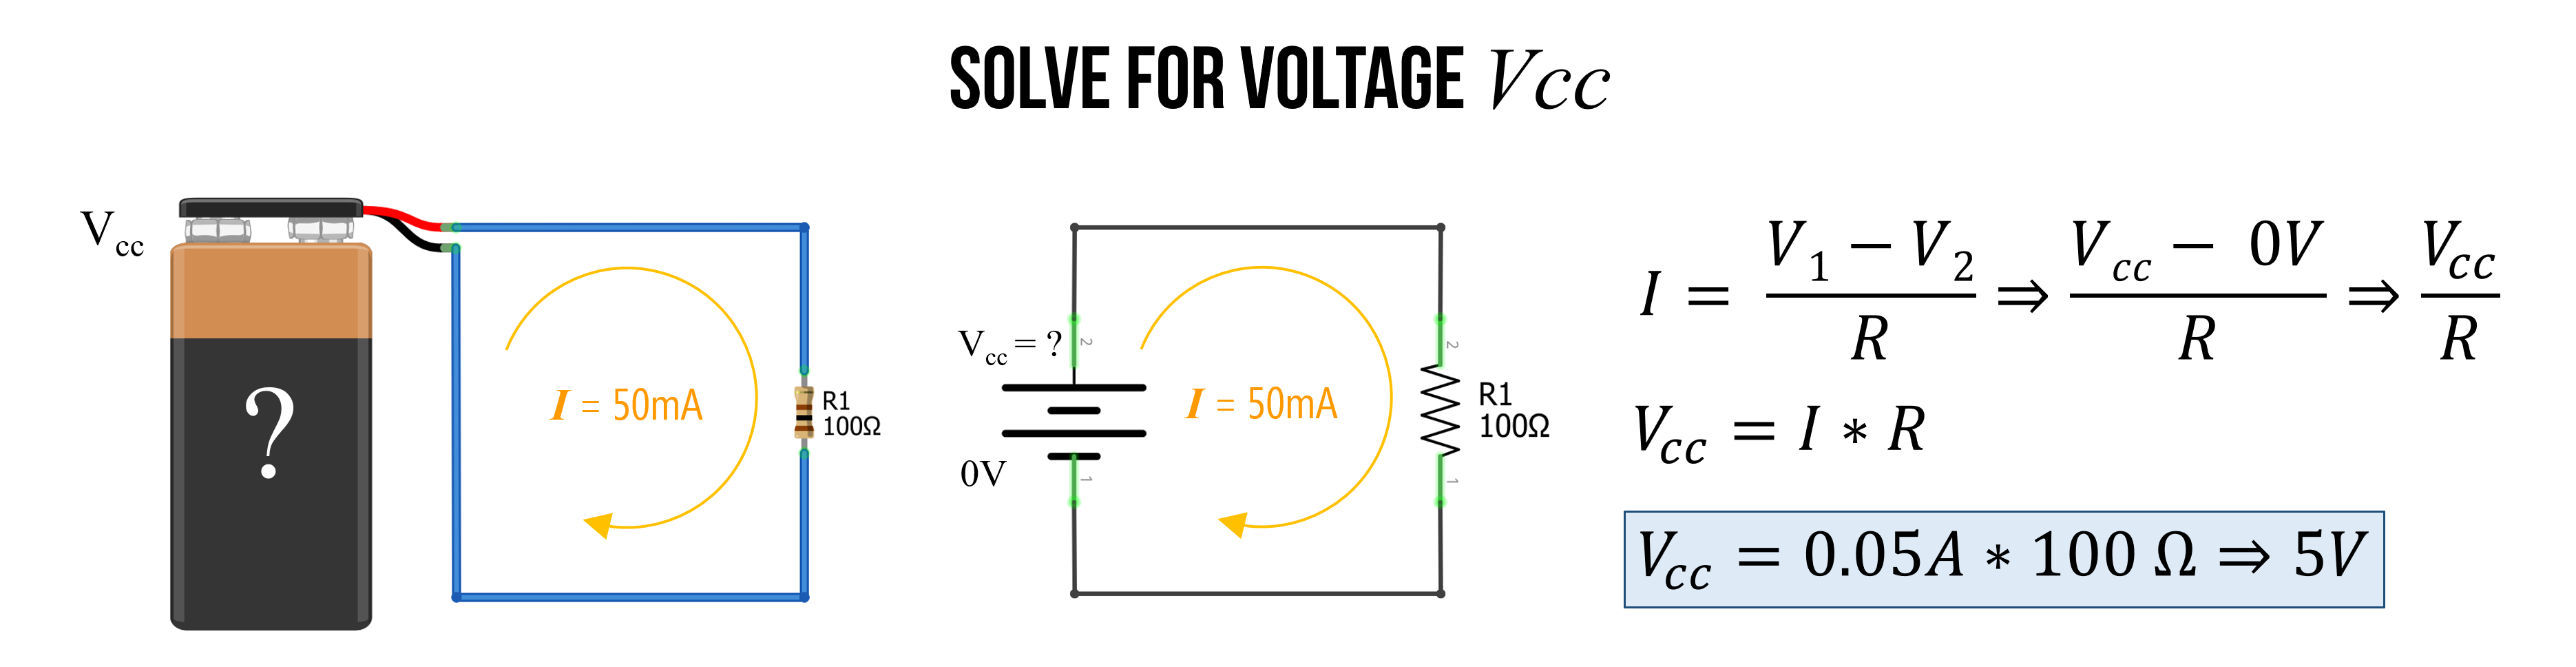 Diagram shows a similar circuit as before but with an unknown voltage source V and a known current (I=50mA) and a known resistance (R=100Ω). Given this information, we can use V = I * R to solve for V. So, V = 50mA * 100Ω => 5V